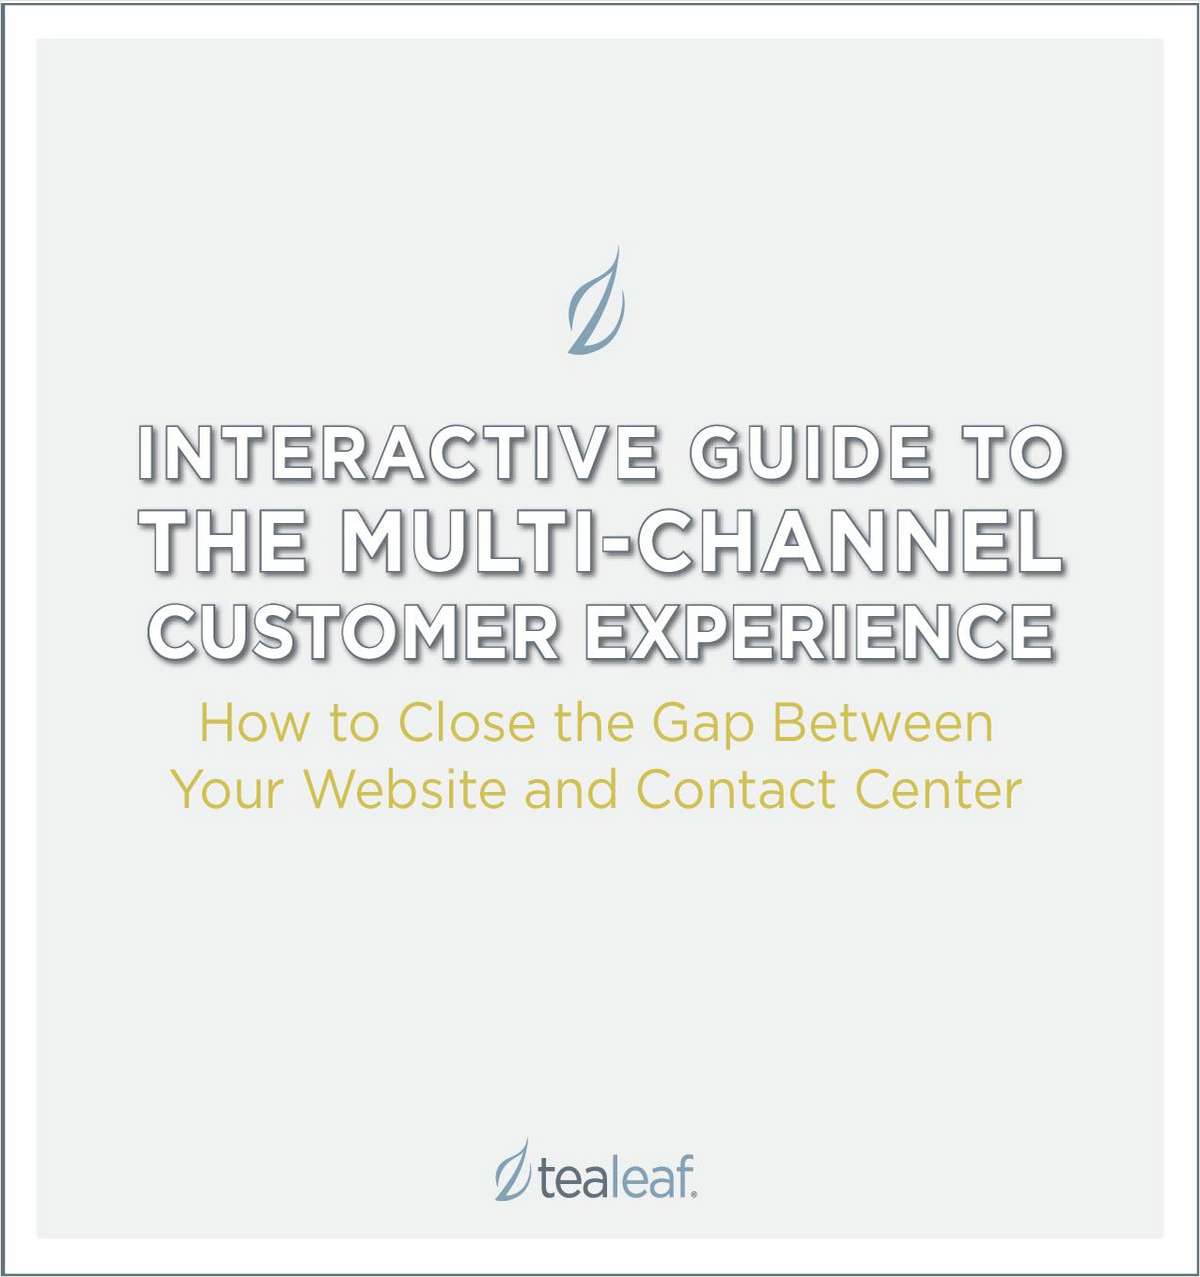 Guide to the Multi-Channel Customer Experience